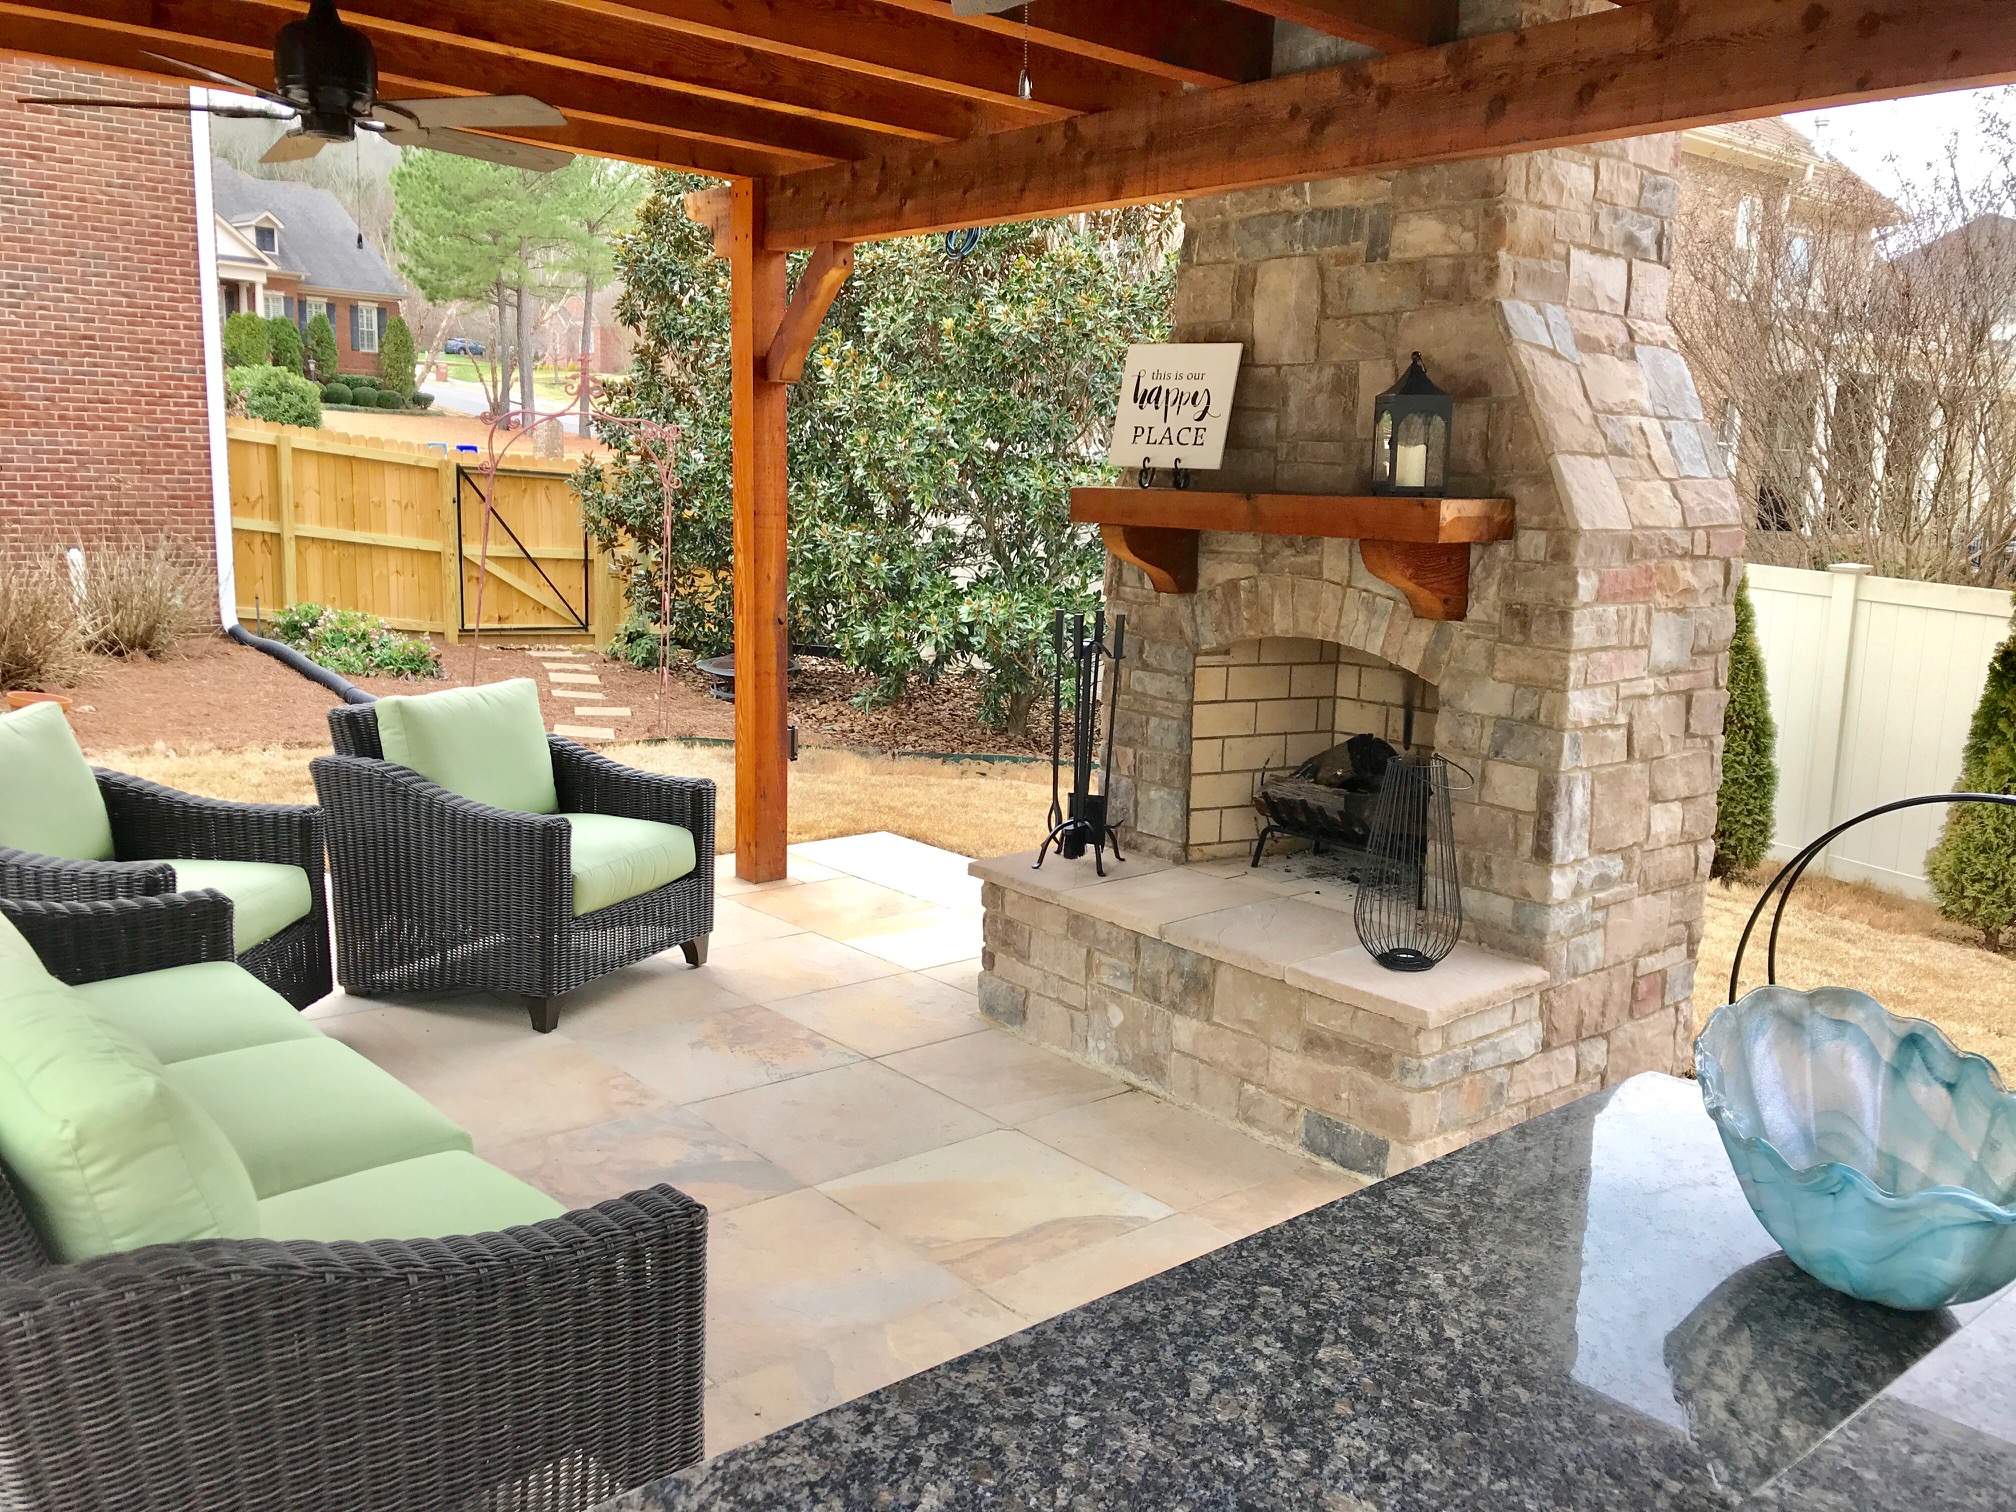 Work from home outdoor space-Covered patio with lounge seating and a ceiling fan, with a fireplace as the focal point.